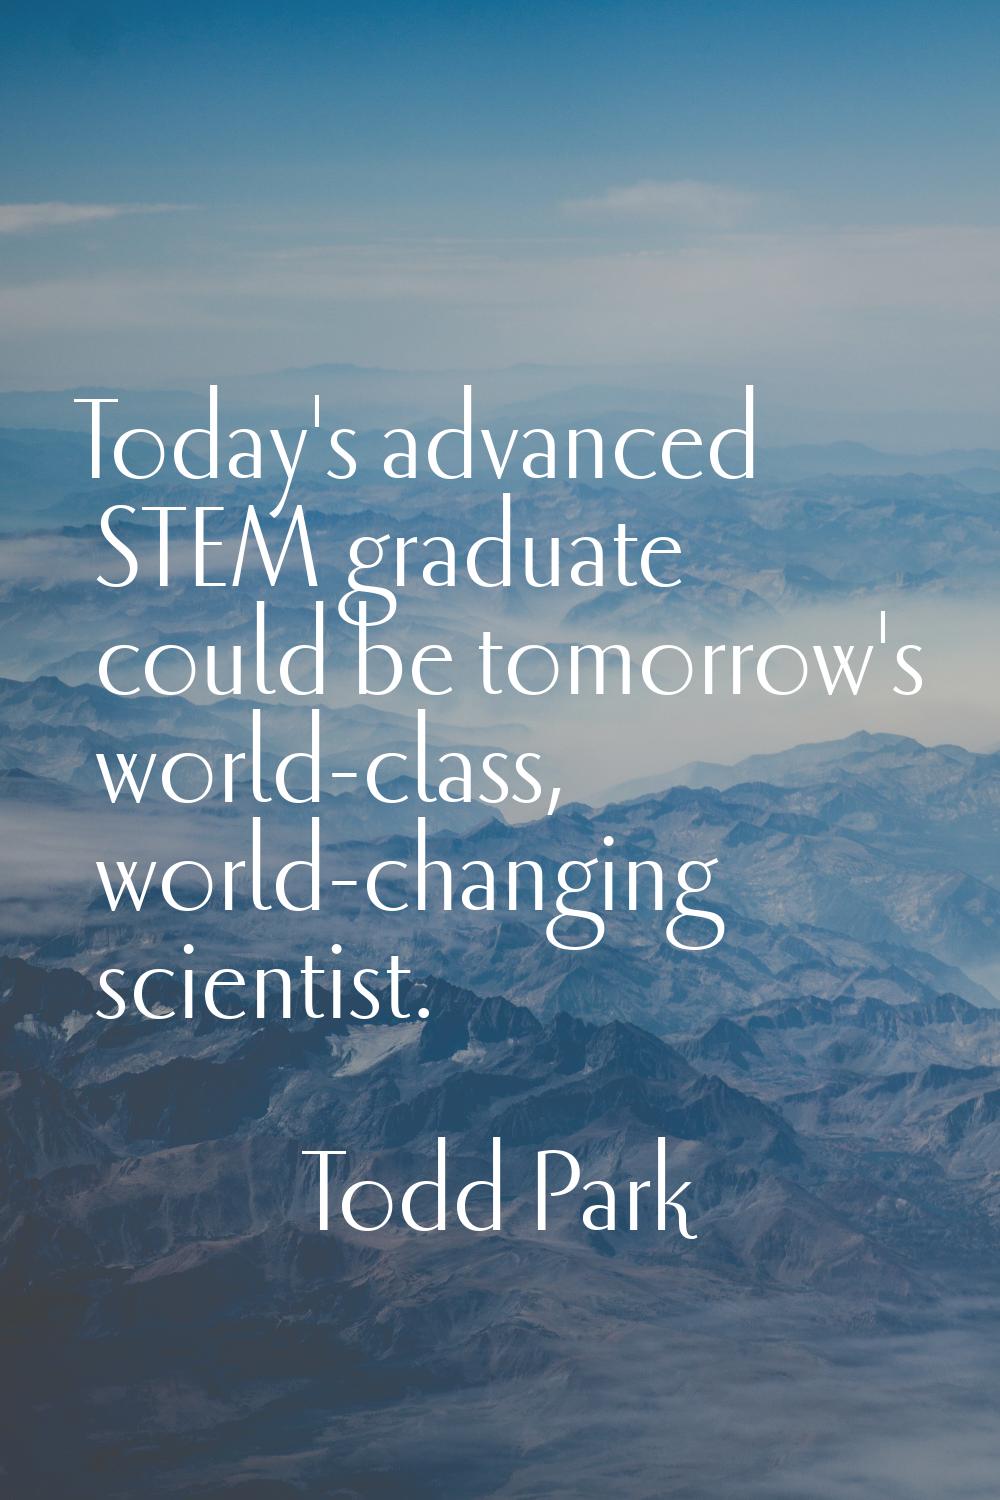 Today's advanced STEM graduate could be tomorrow's world-class, world-changing scientist.